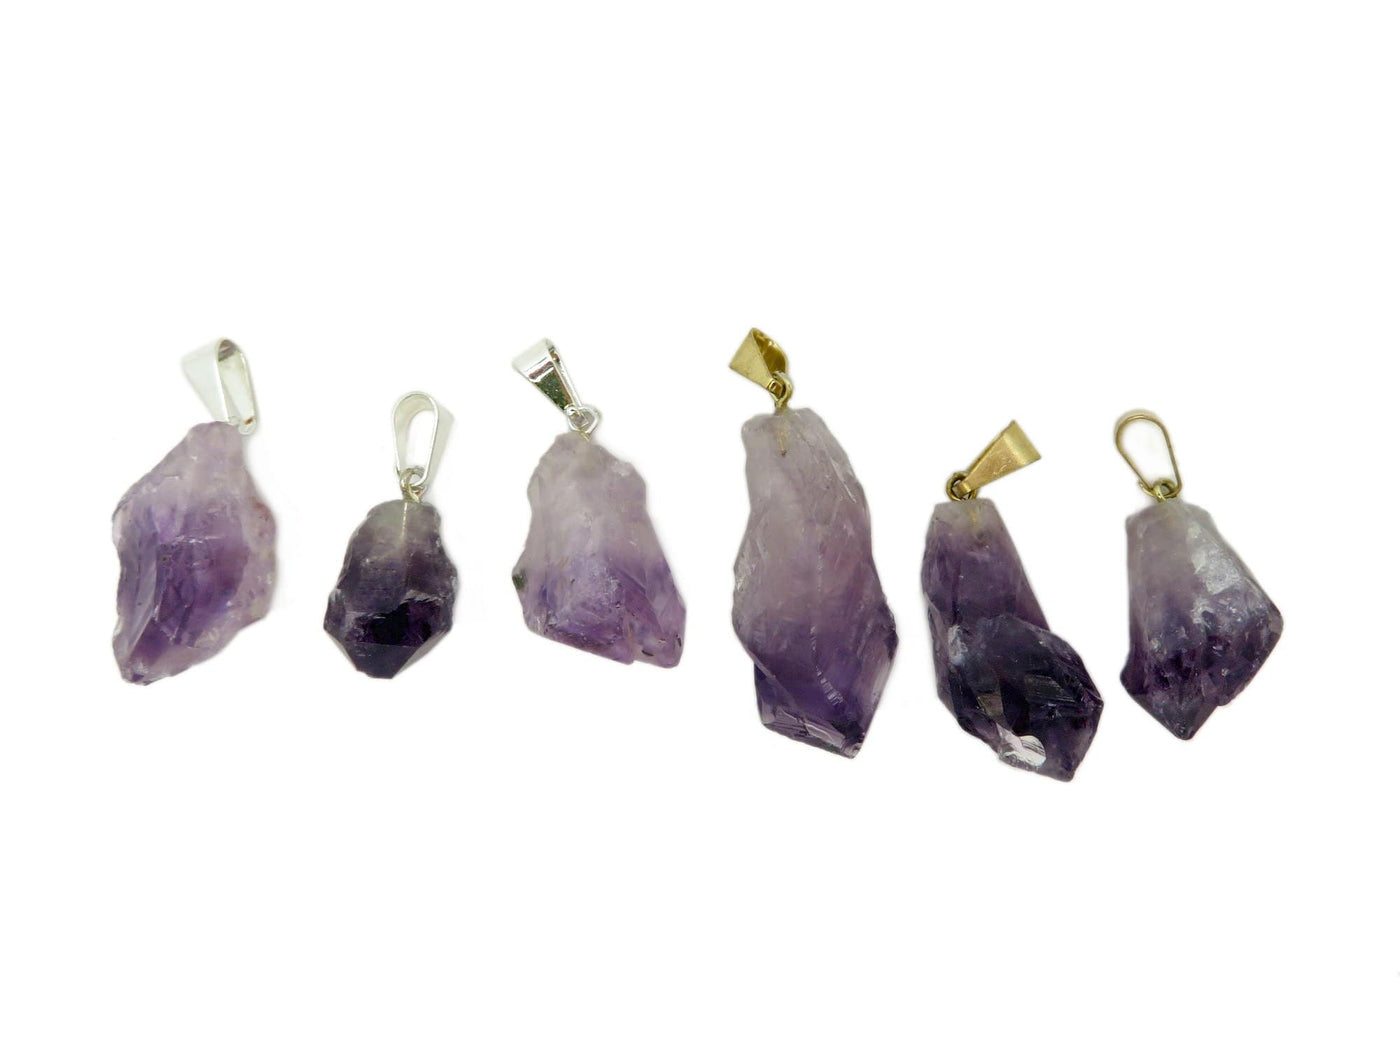 Three Petite Amethyst Quartz Point Pendant with silver bail on the left and three Petite Amethyst Quartz Point Pendant with gold bail on the right